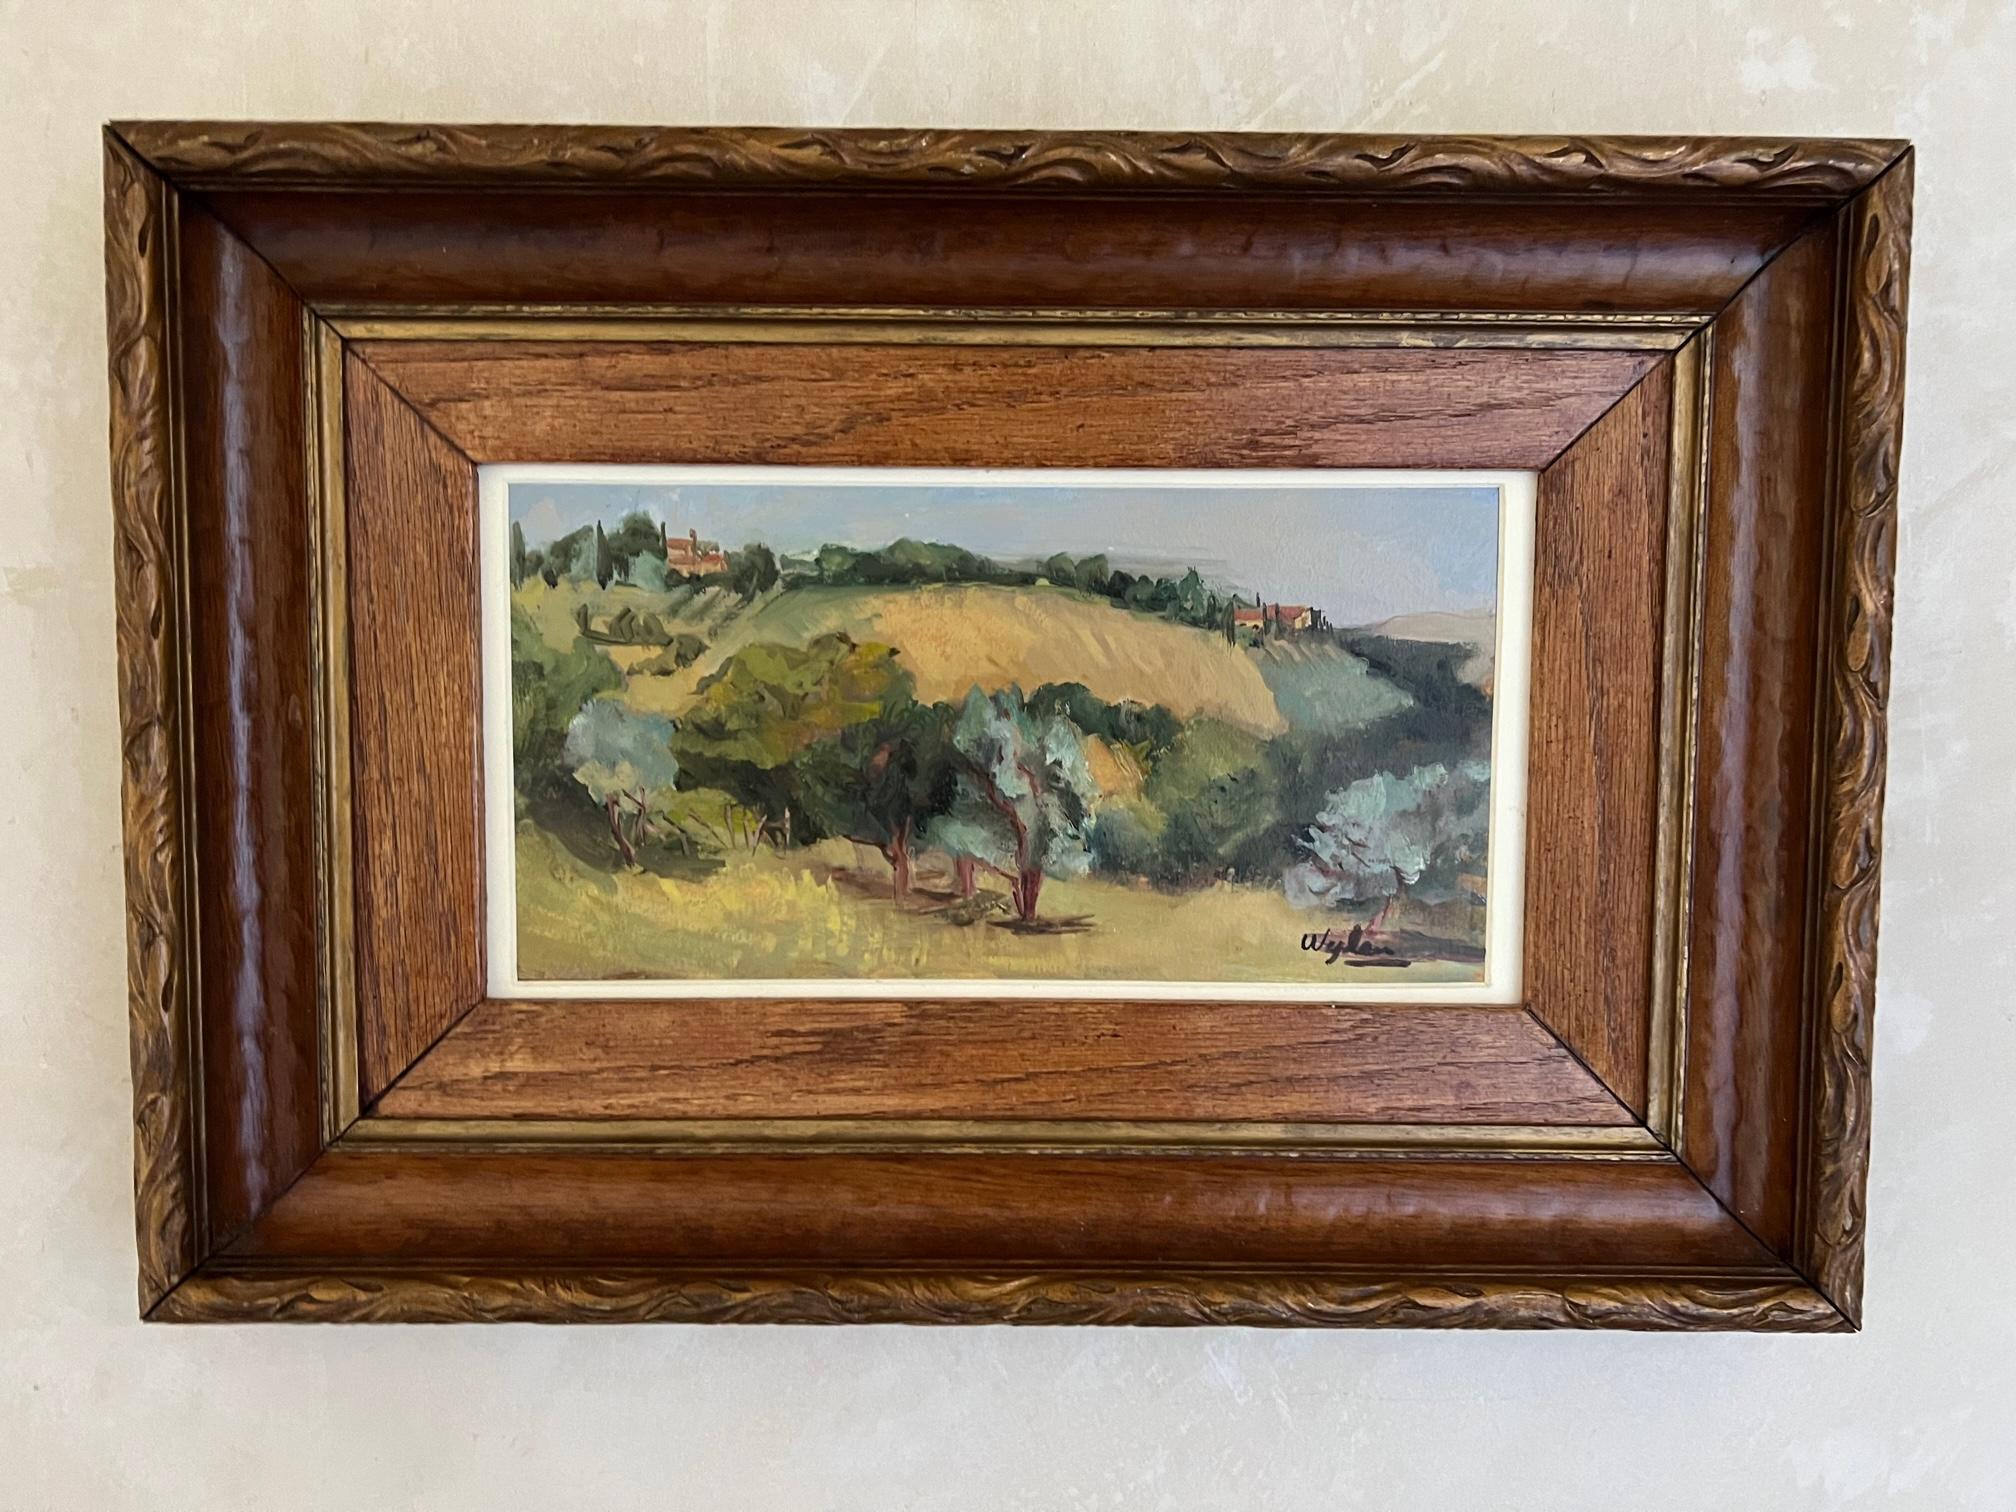 Vintage vineyard landscape painting on paper signed by the artist Wylan. 

 Framed also carved wooden frame from the 1940's.

Painting measurements 13 wide x 6.5 tall.